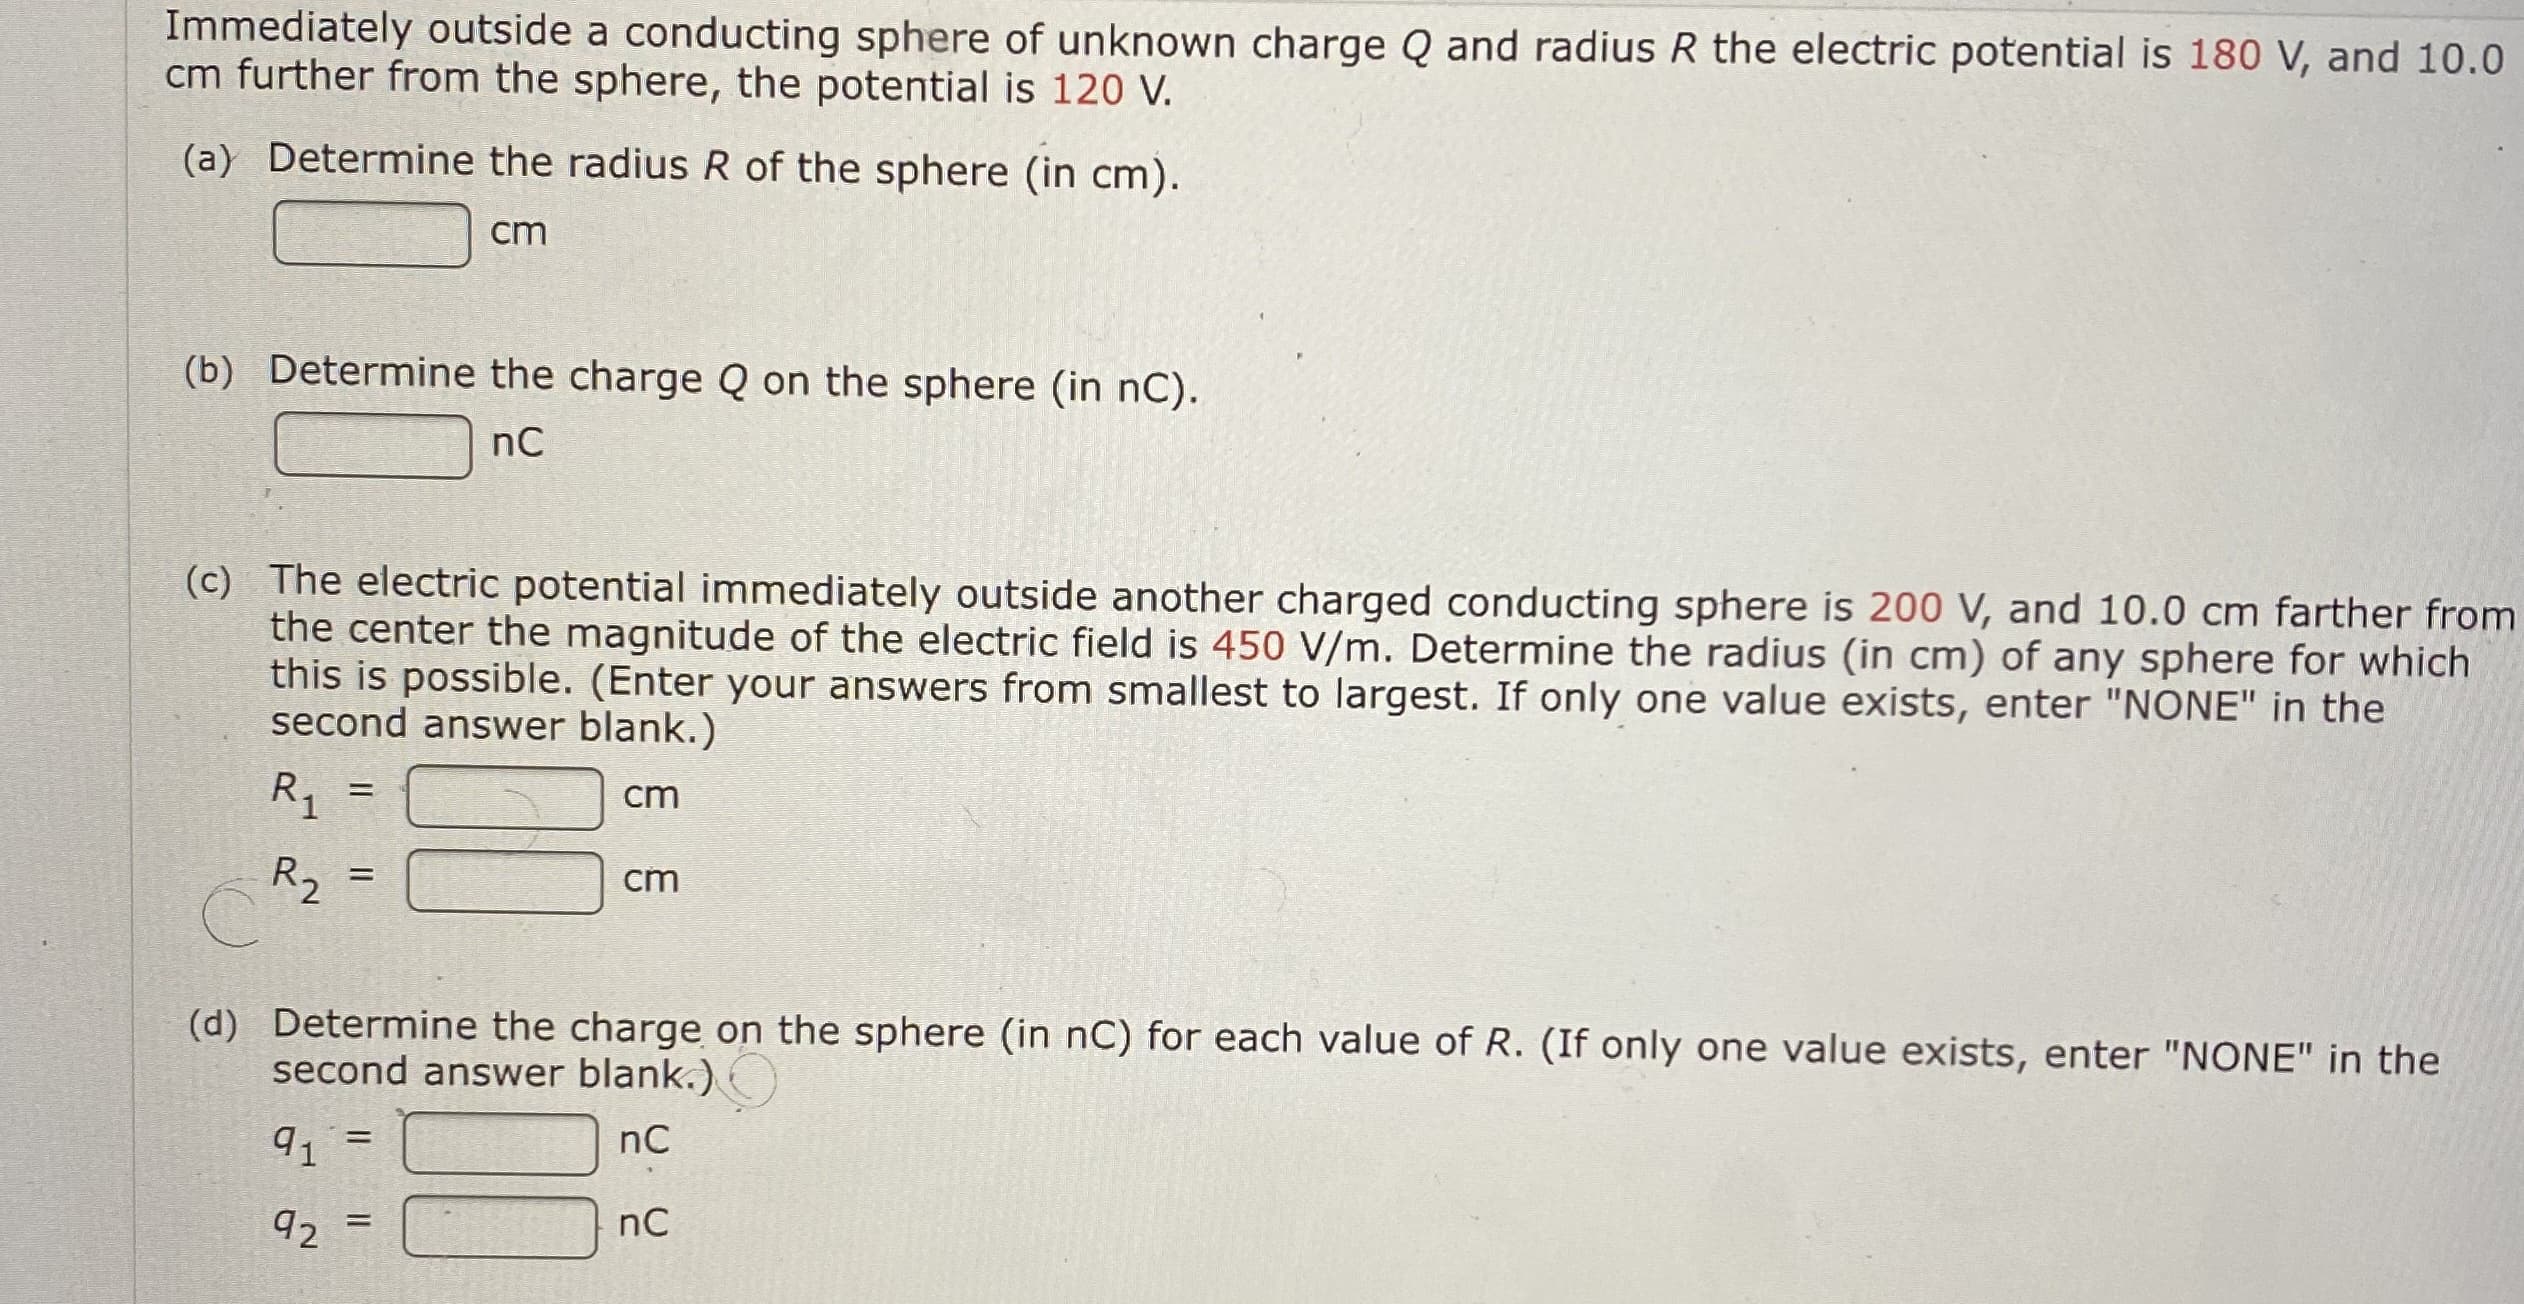 Immediately outside a conducting sphere of unknown charge Q and radius R the electric potential is 180 V, and 10.0
cm further from the sphere, the potential is 120 V.
(a) Determine the radius R of the sphere (in cm).
cm
(b) Determine the charge Q on the sphere (in nC).
nC
(c) The electric potential immediately outside another charged conducting sphere is 200 V, and 10.0 cm farther from
the center the magnitude of the electric field is 450 V/m. Determine the radius (in cm) of any sphere for which
this is possible. (Enter your answers from smallest to largest. If only one value exists, enter "NONE" in the
second answer blank.)
R, =
cm
R2
cm
(d) Determine the charge on the sphere (in nC) for each value of R. (If only one value exists, enter "NONE" in the
second answer blank.)
nC
91
92
nC
